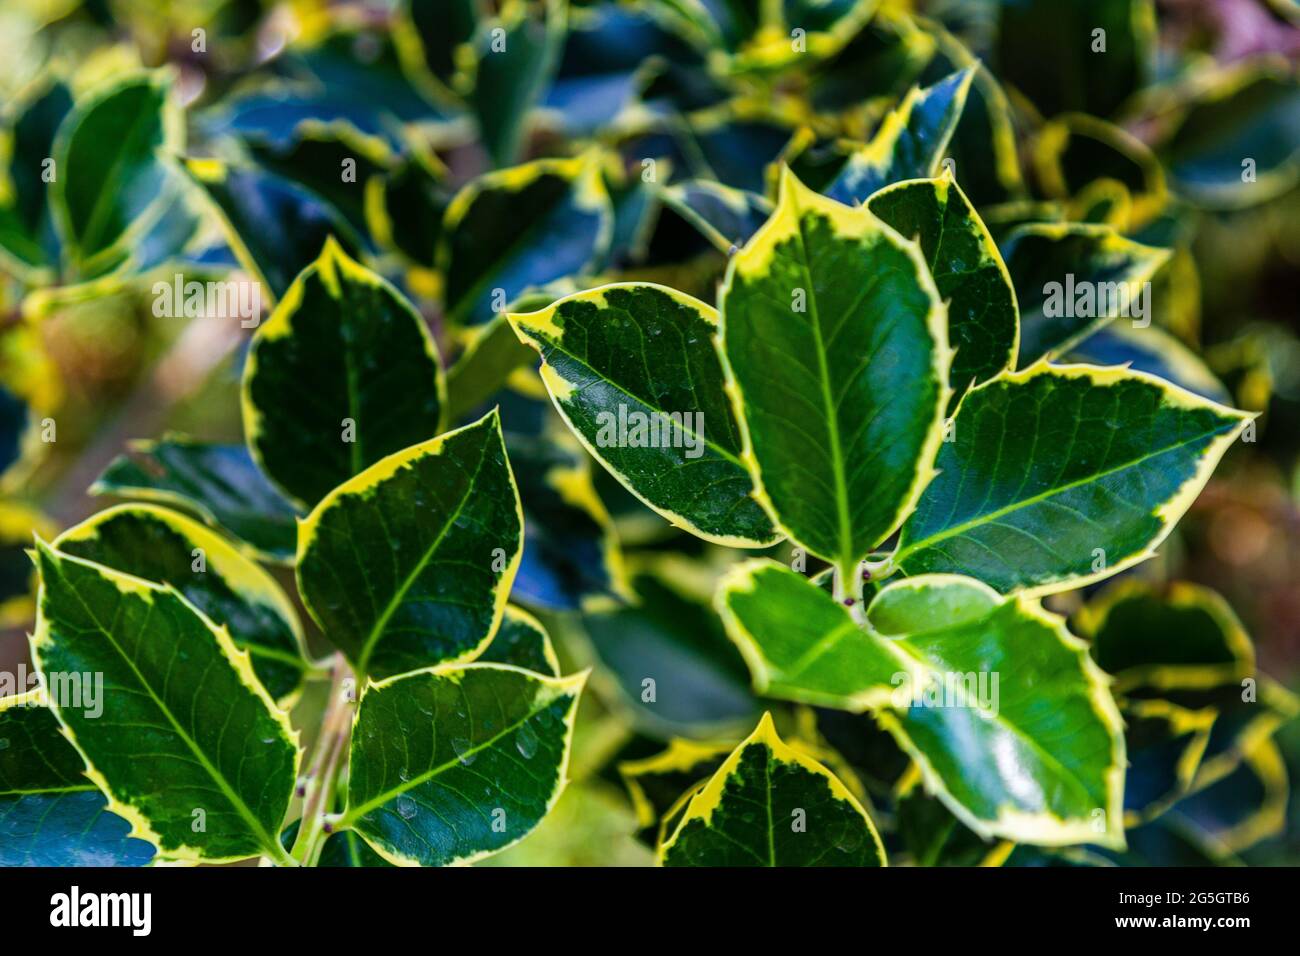 Leaves texture. Yellow-green leaves. Plants in the garden. Stock Photo